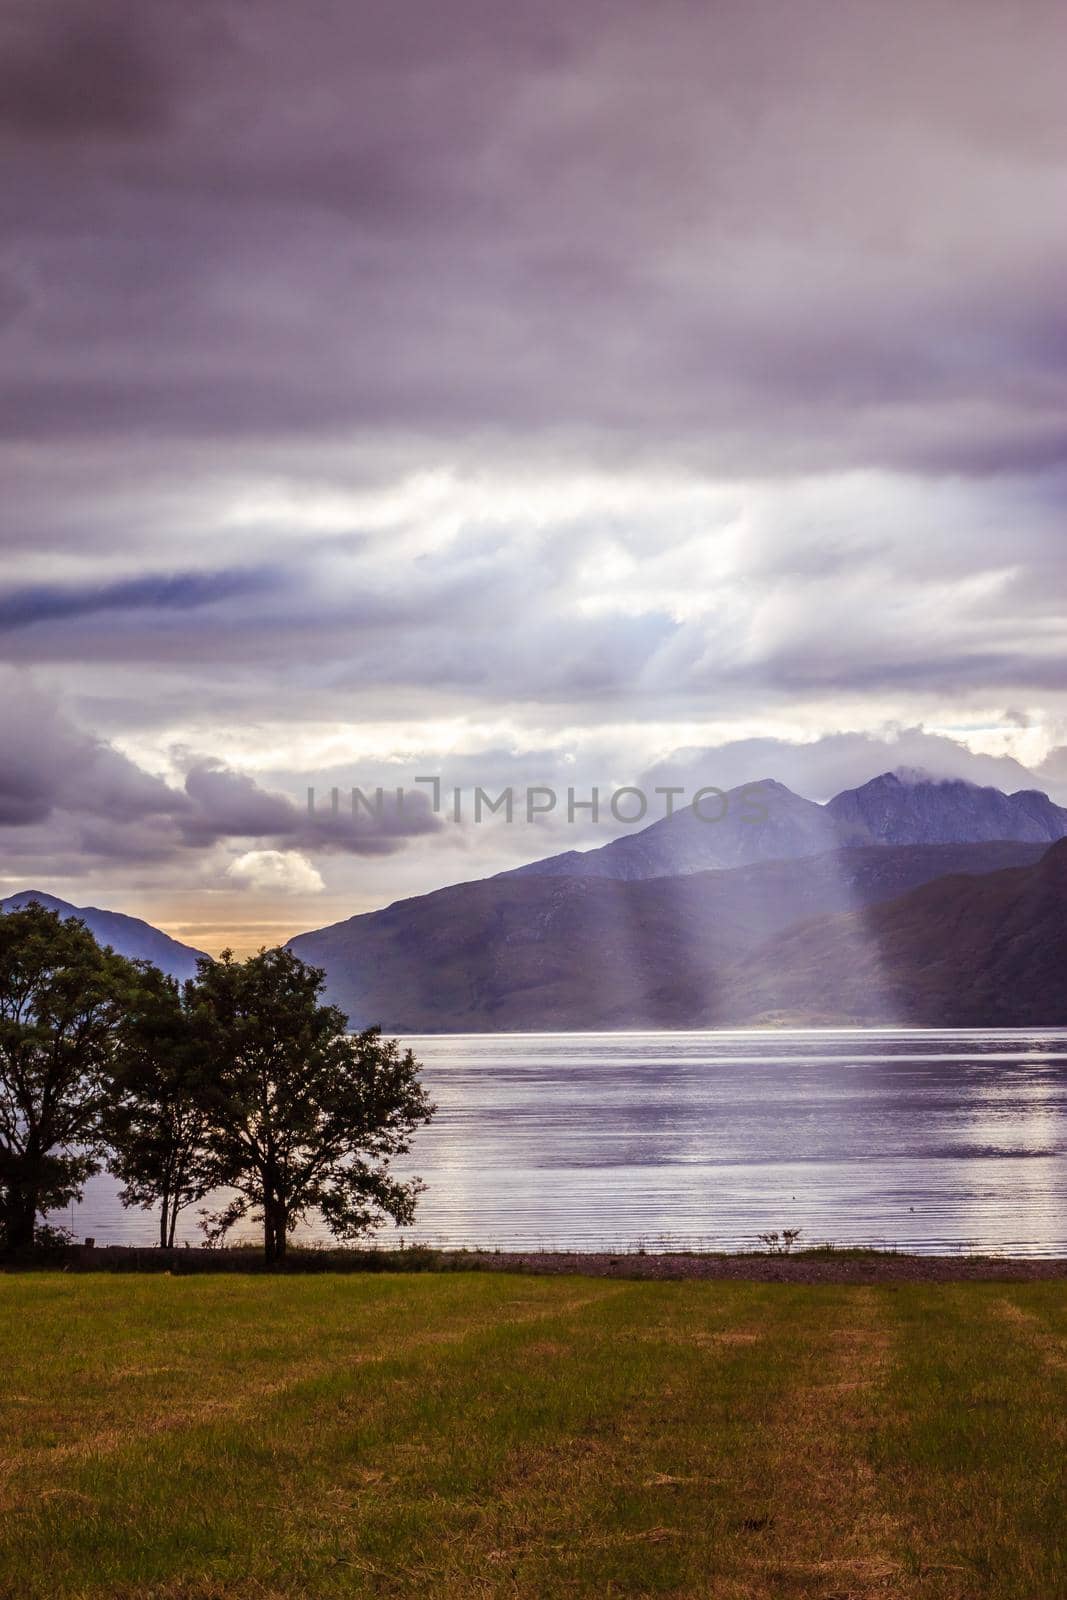 Beautiful mystic landscape lake scenery in Scotland with cloudy sky, meadow, trees and sunbeams